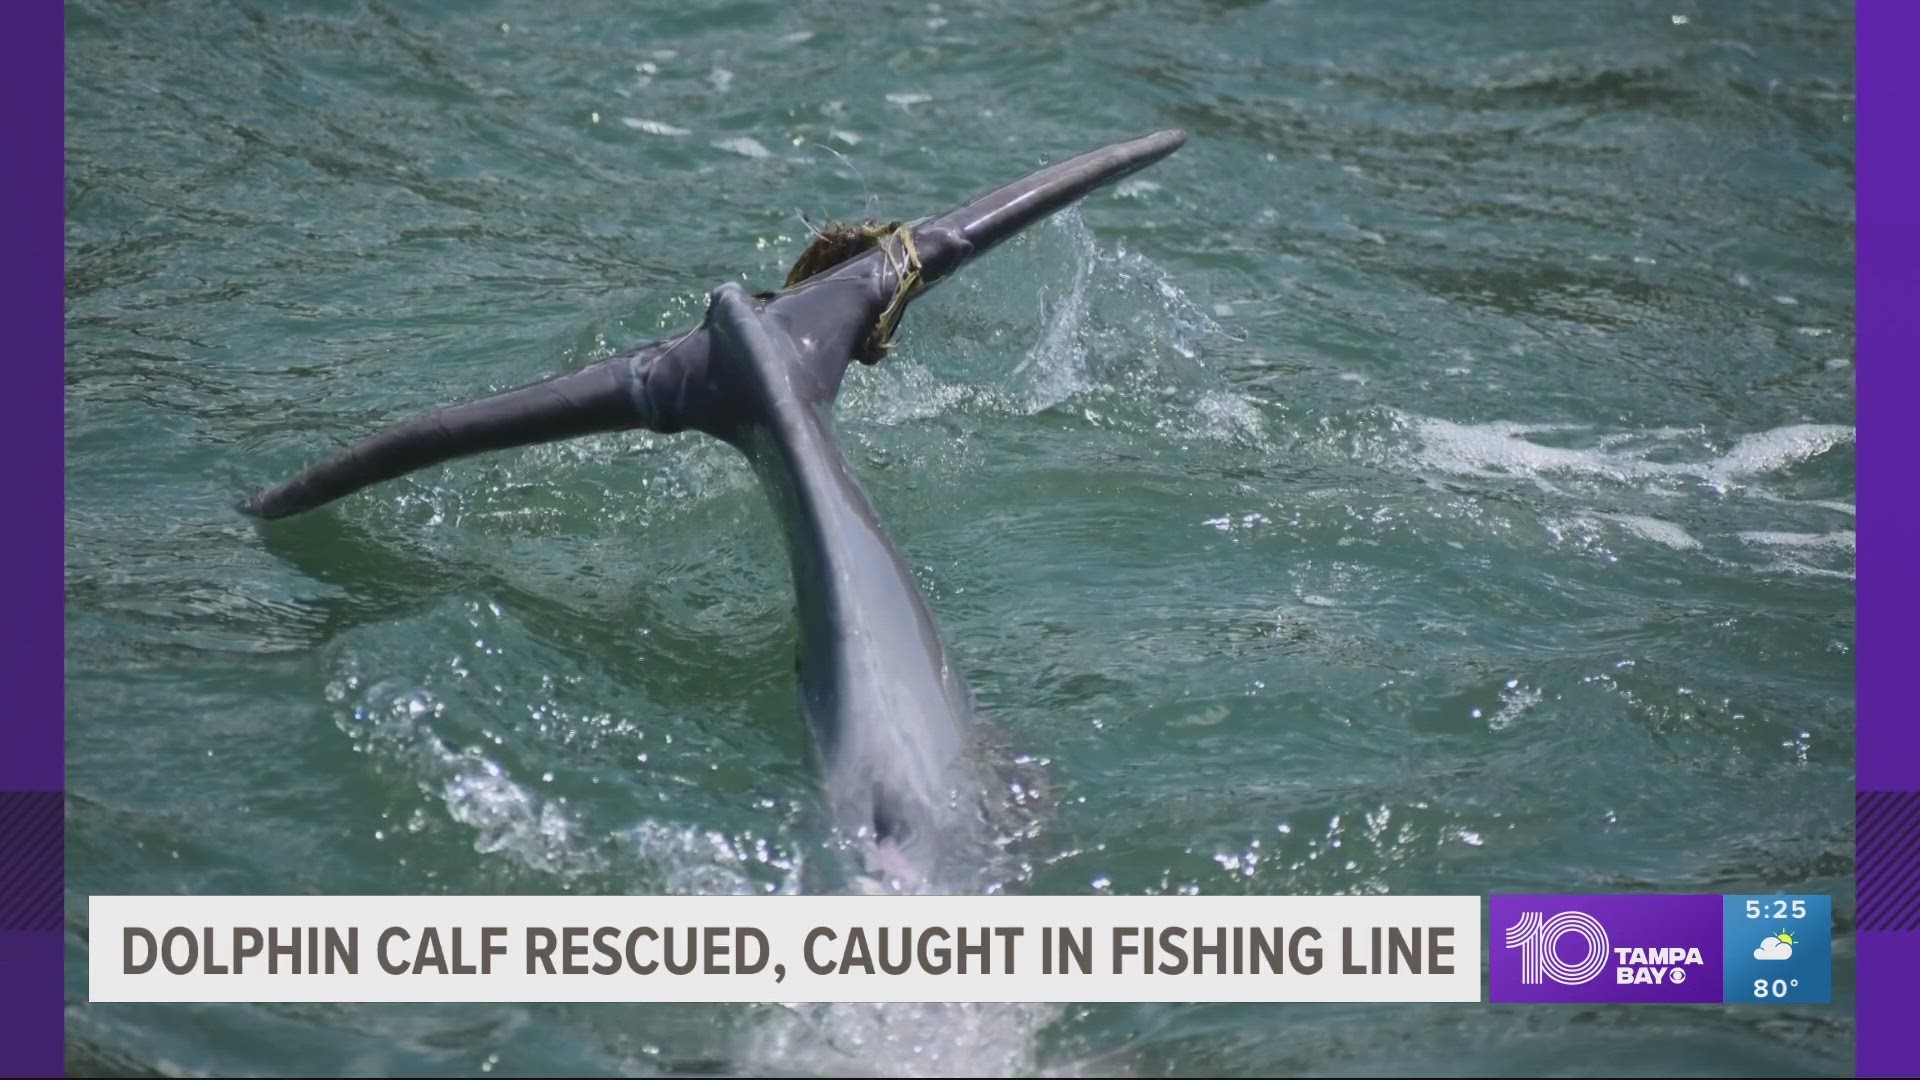 There was a fishing line wrapped around its tail causing some pretty deep cuts.